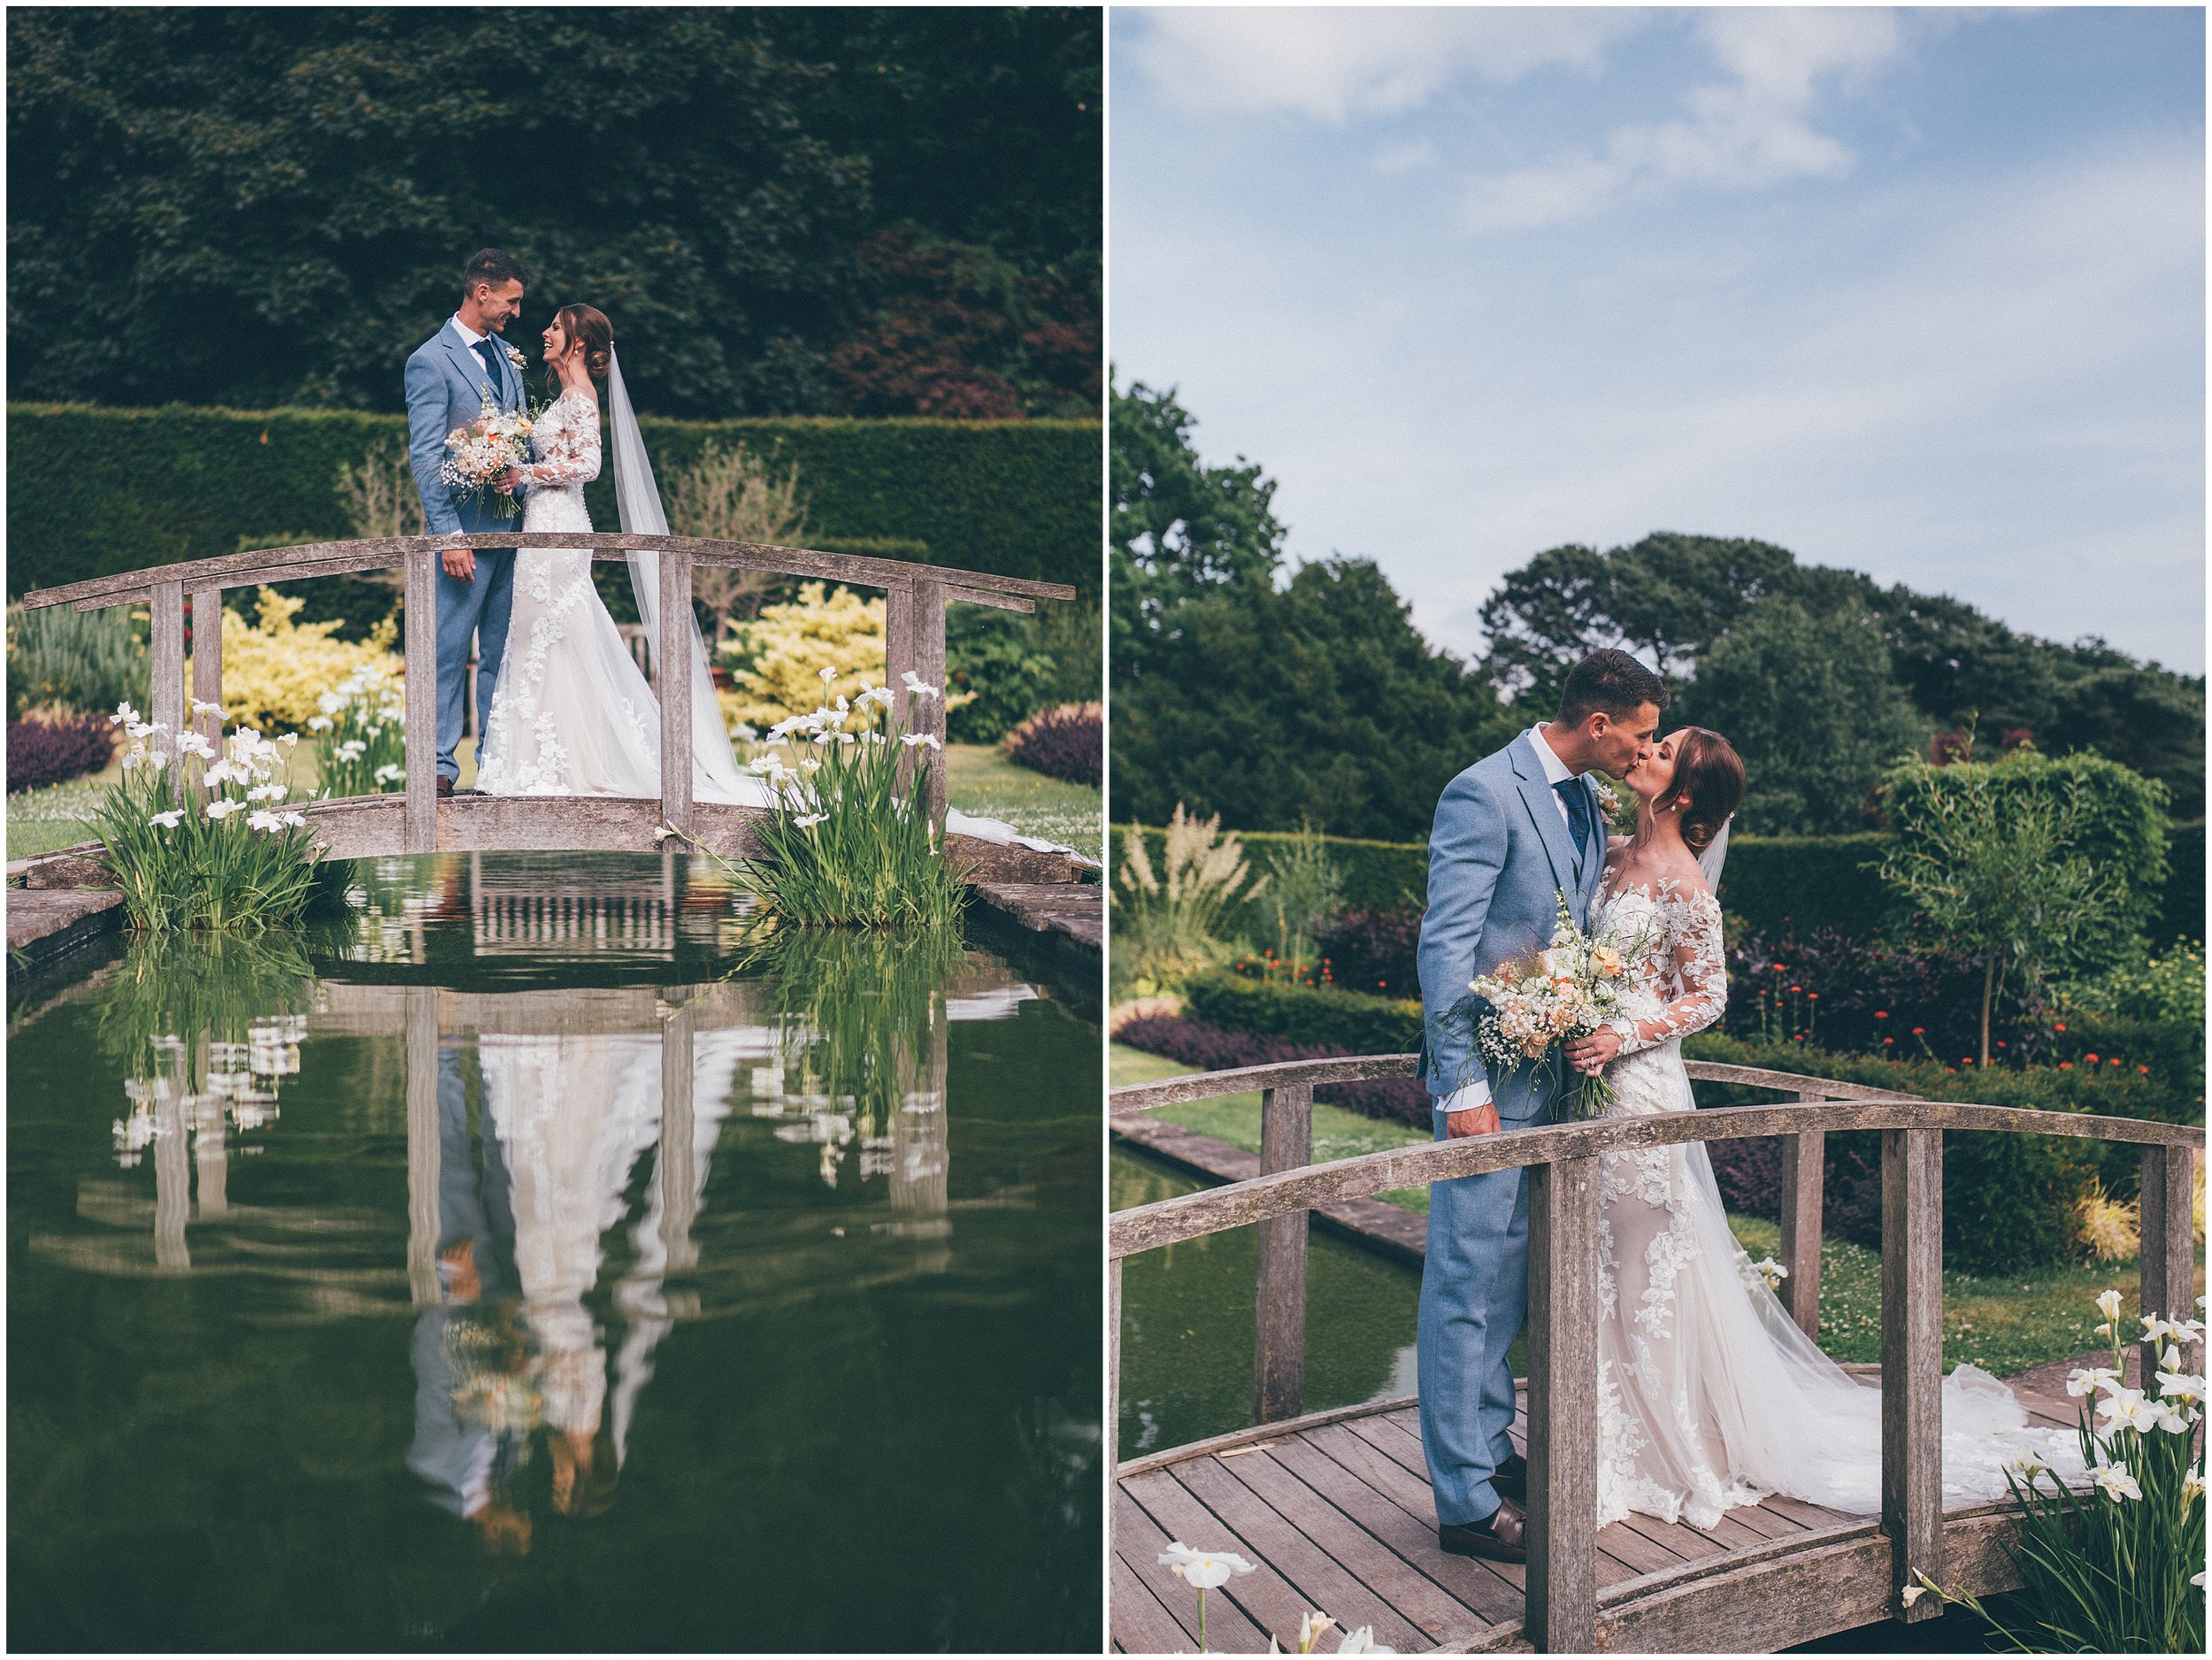 Newlyweds have their wedding portraits taken by North West wedding photographer, Helen Jane Smiddy Photography, at Abbeywood Estate in Delamere, Cheshire.